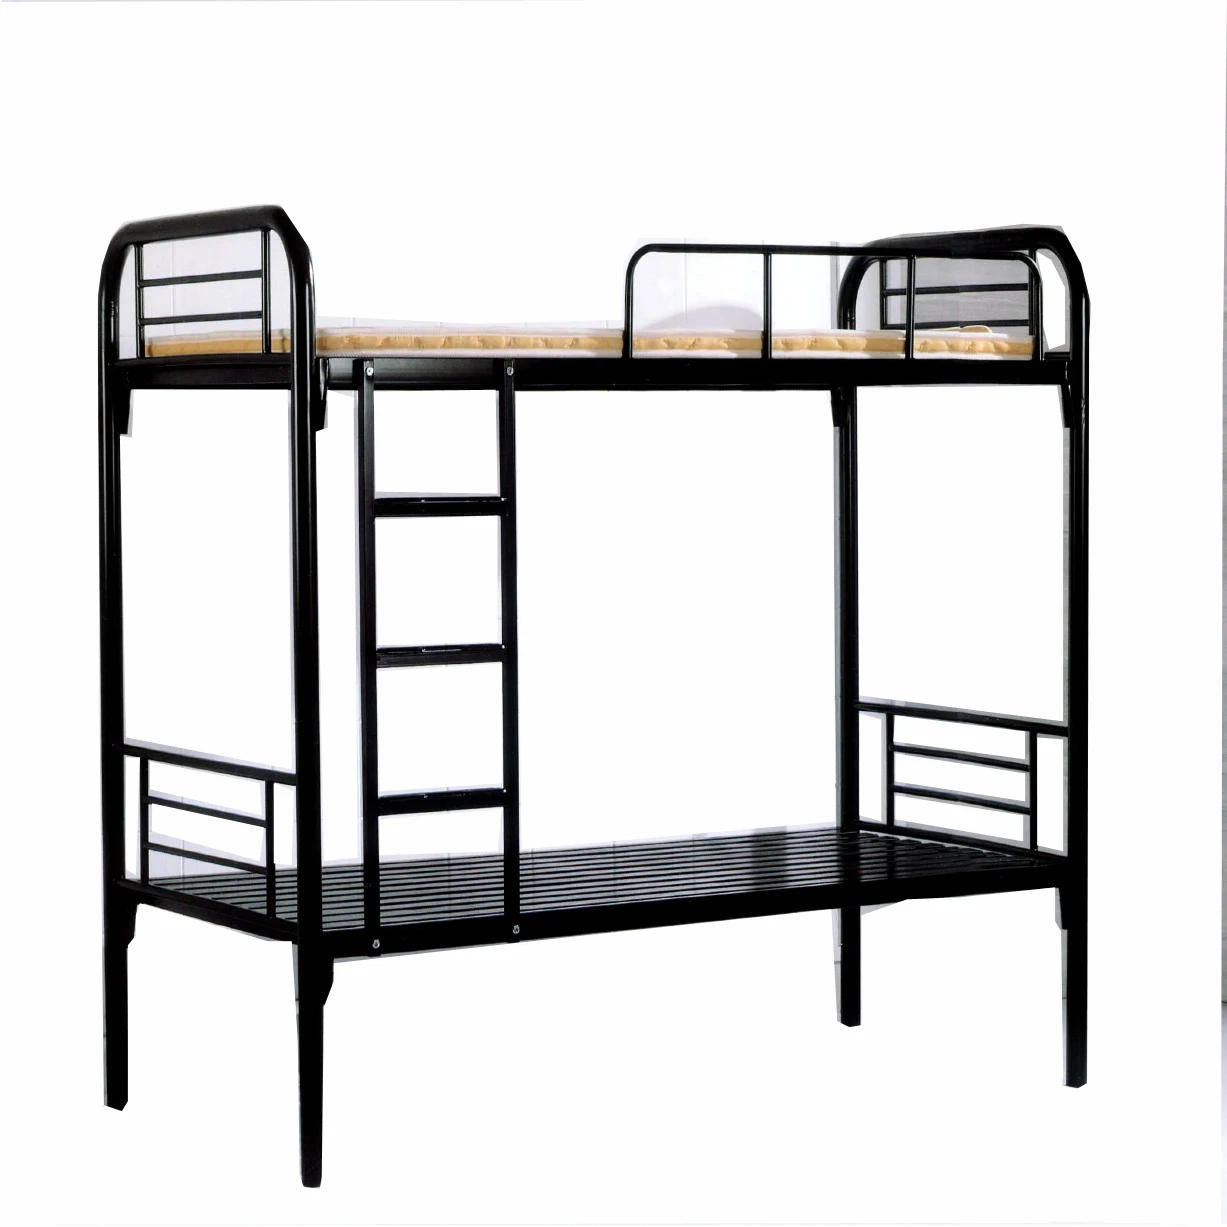 Adult Bunk Bed For School Dormitory Double Bunk Beds Buy Twin Bunk